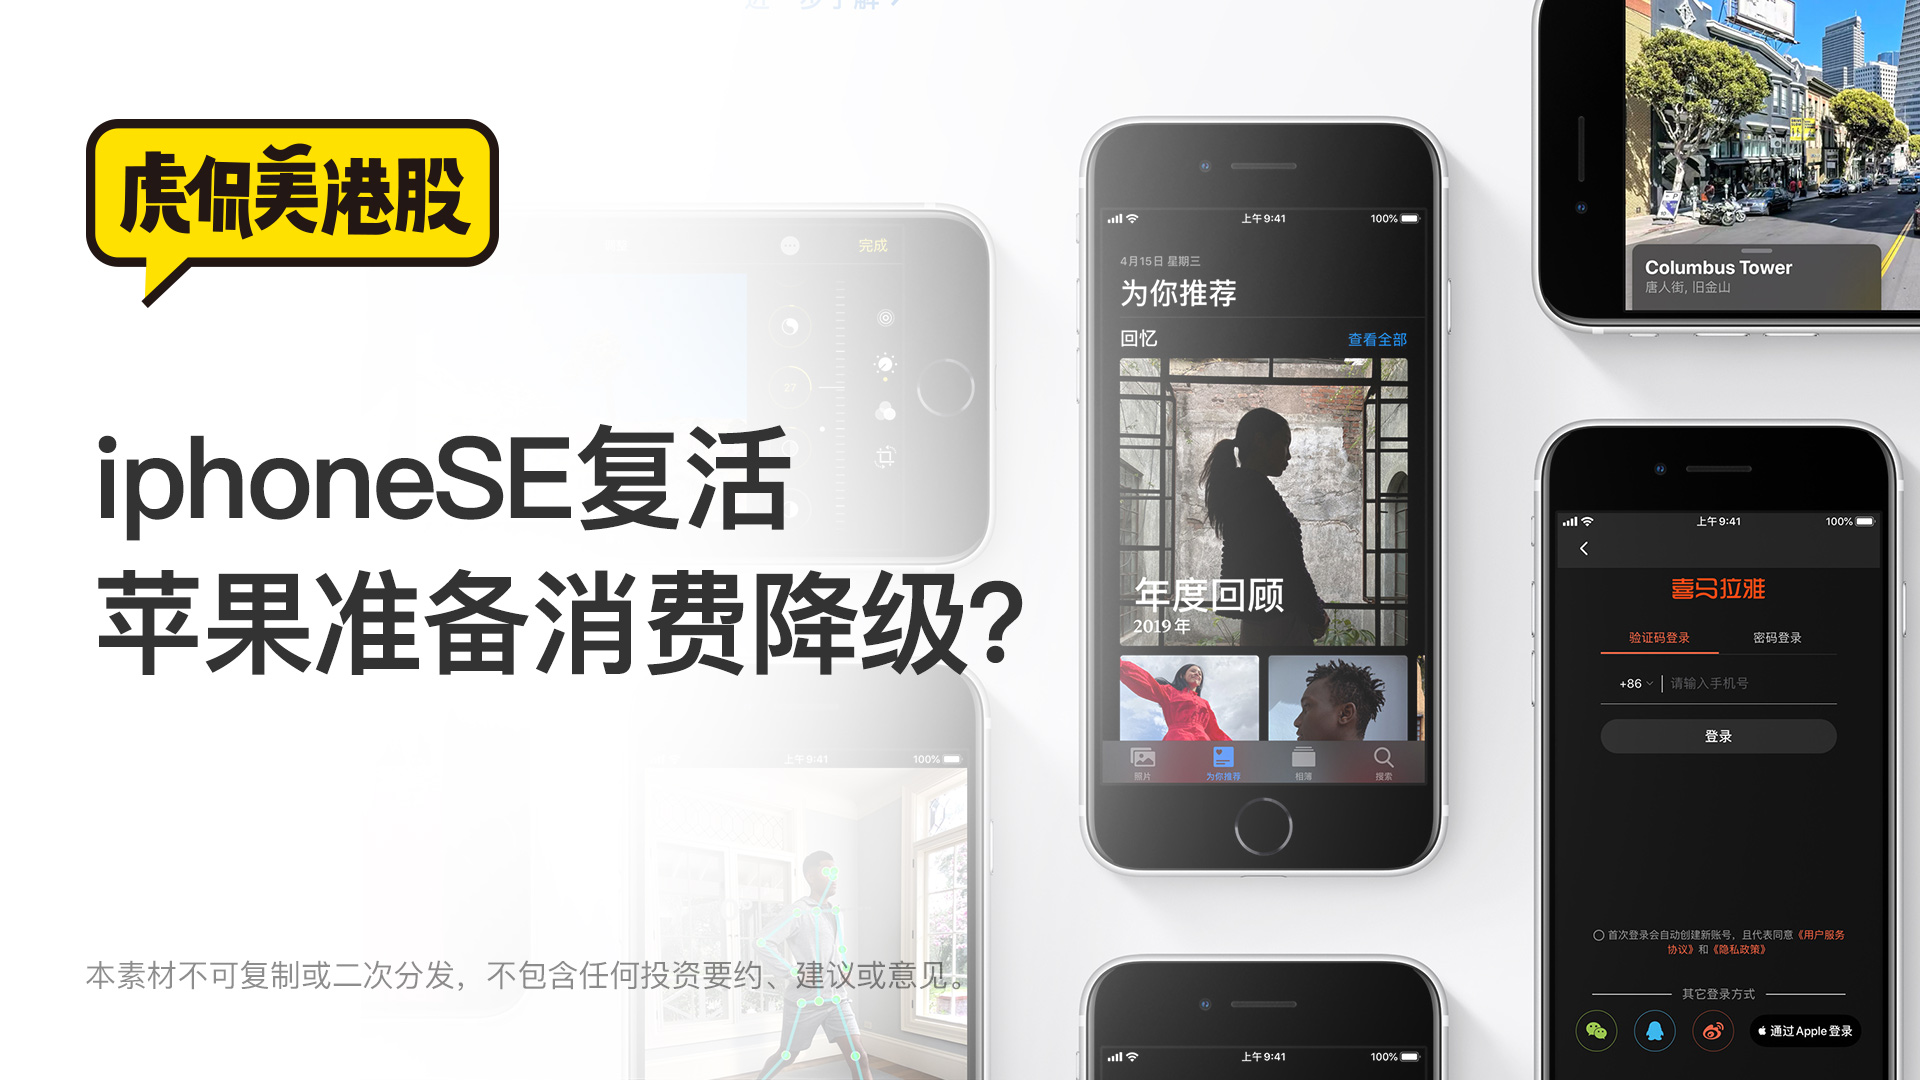 iphoneSE复活 苹果准备消费降级？